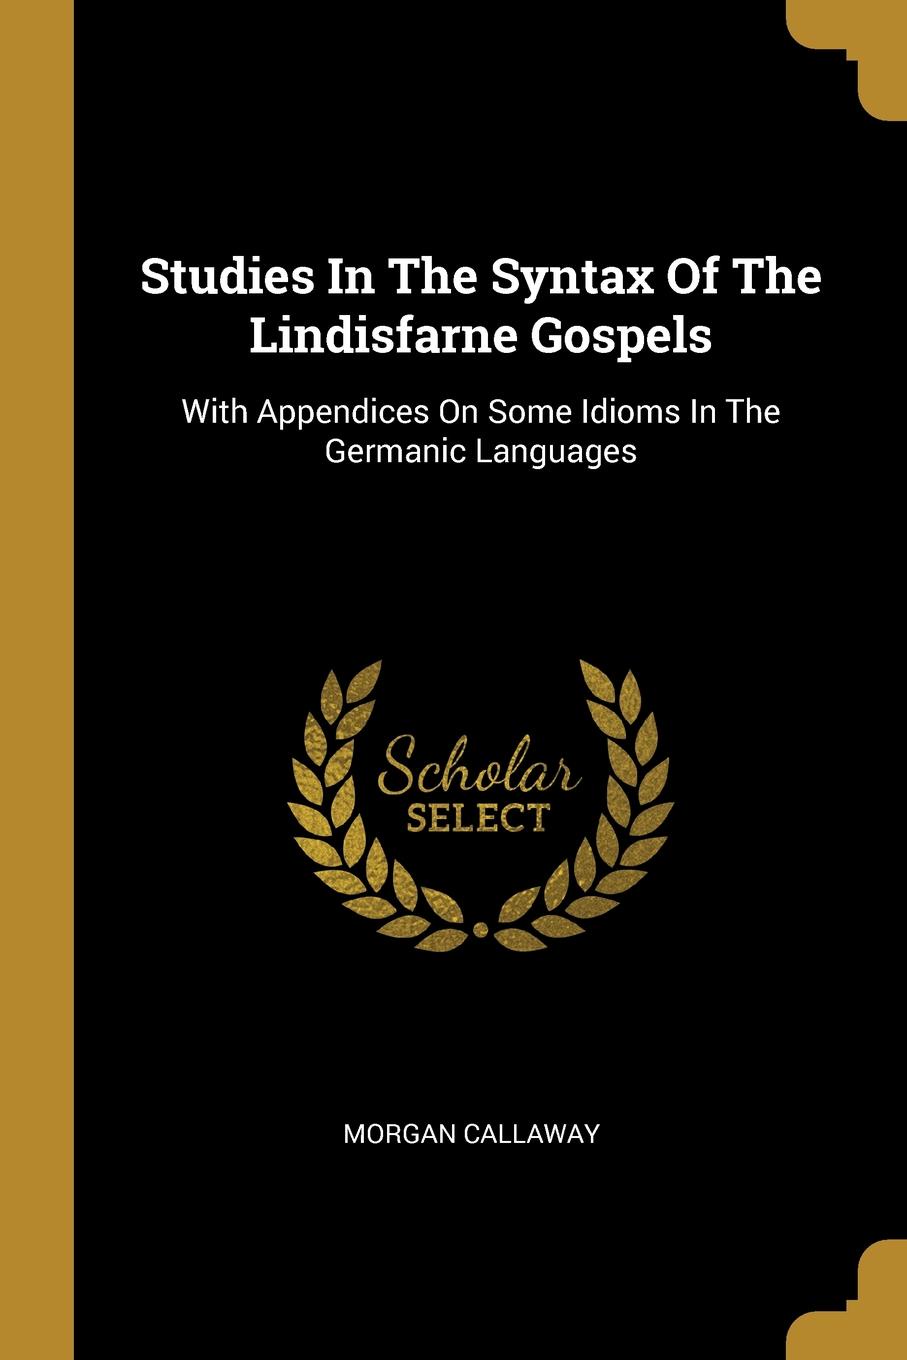 Studies In The Syntax Of The Lindisfarne Gospels. With Appendices On Some Idioms In The Germanic Languages